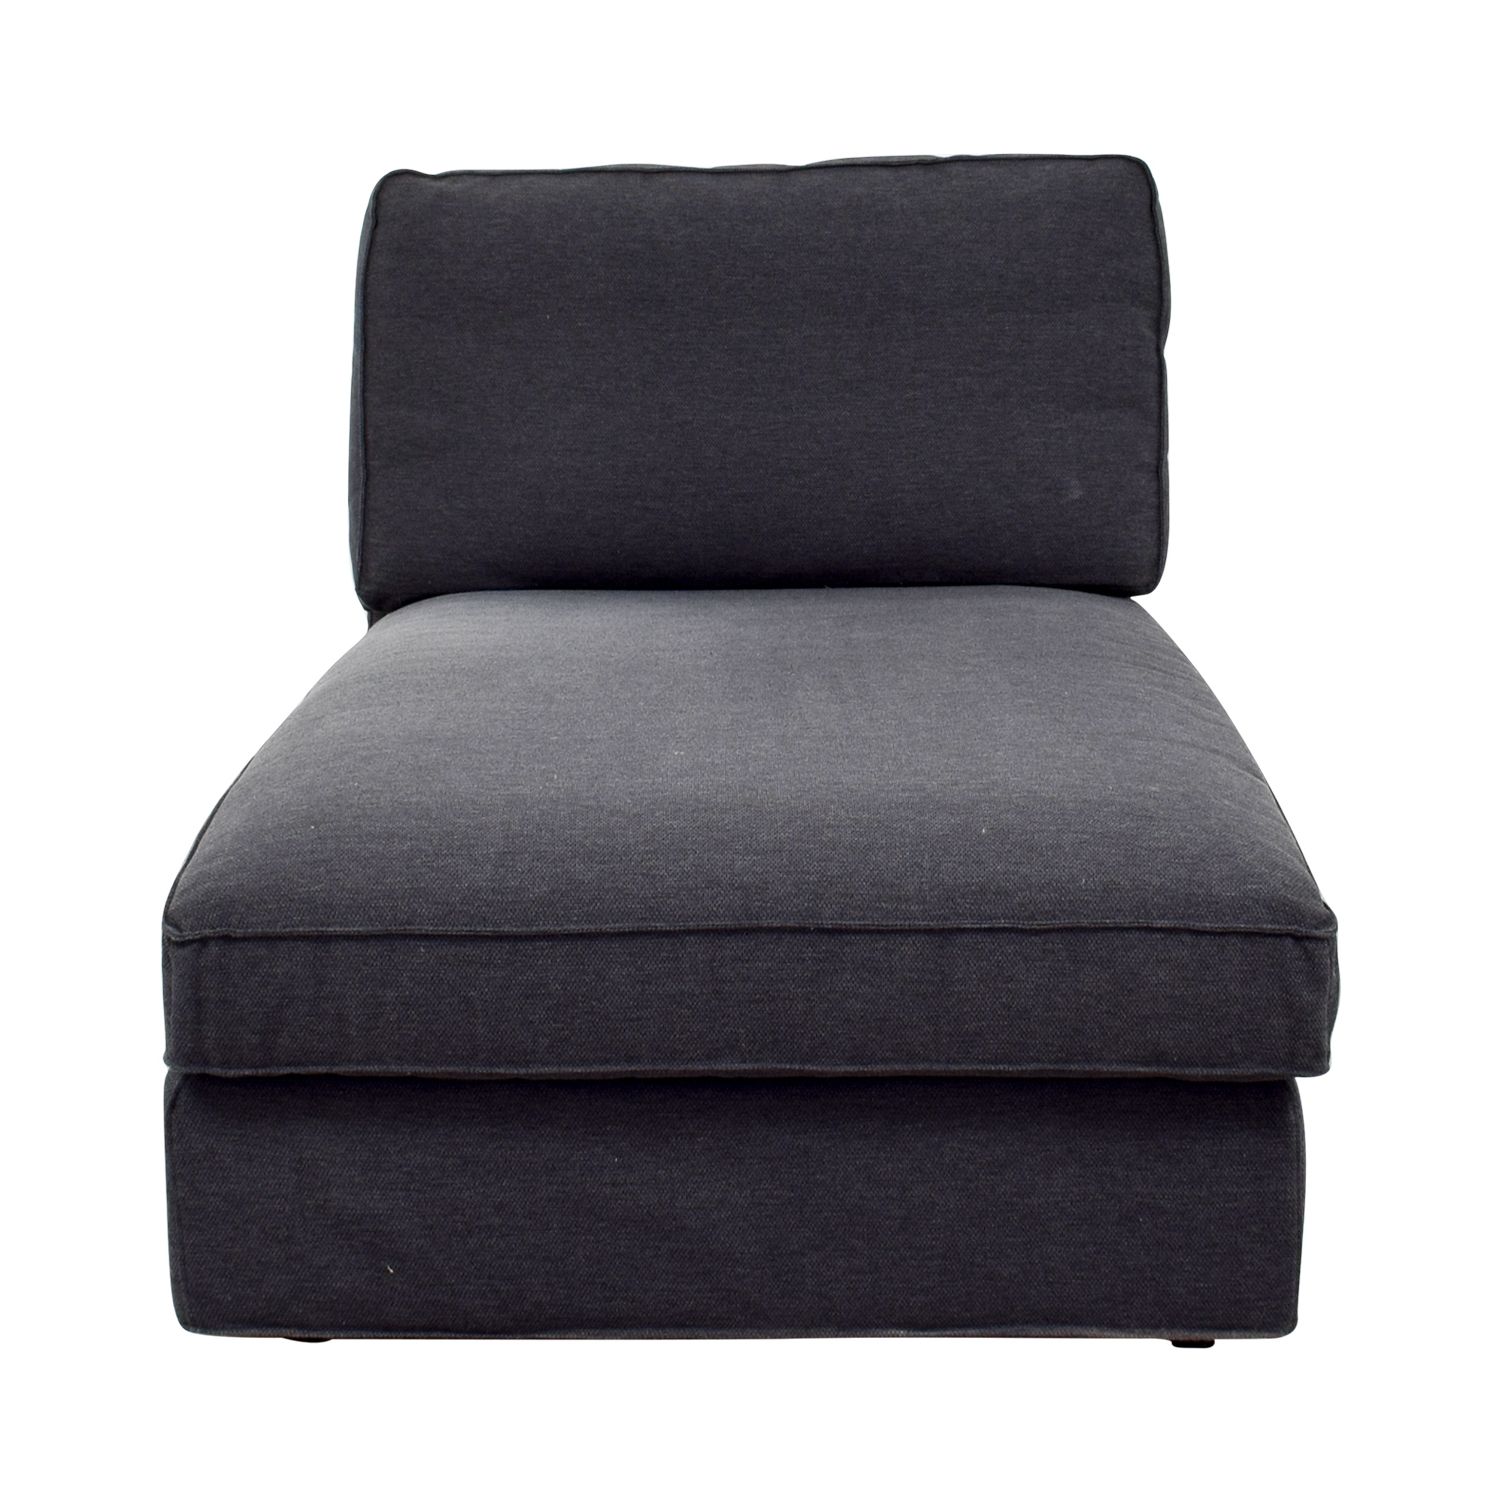 [%86% Off – Pottery Barn Pottery Barn Chaise Lounge / Sofas Regarding Fashionable Pottery Barn Chaises|pottery Barn Chaises In Newest 86% Off – Pottery Barn Pottery Barn Chaise Lounge / Sofas|trendy Pottery Barn Chaises Inside 86% Off – Pottery Barn Pottery Barn Chaise Lounge / Sofas|favorite 86% Off – Pottery Barn Pottery Barn Chaise Lounge / Sofas Pertaining To Pottery Barn Chaises%] (View 11 of 15)